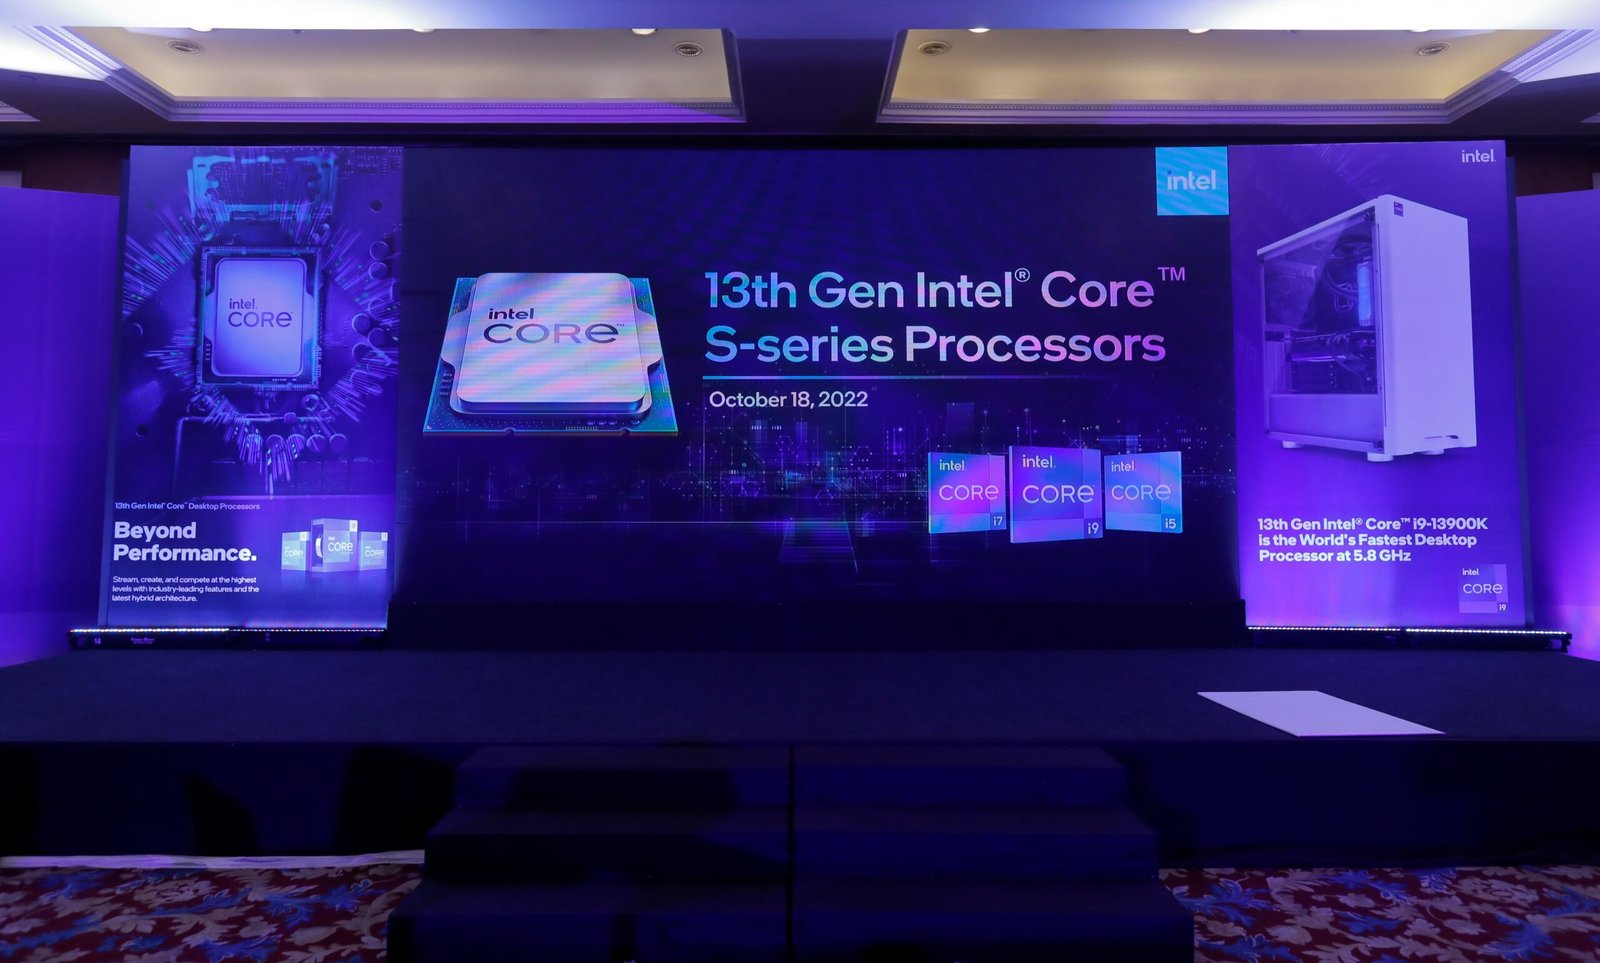 Intel Launches the 13th Gen Intel® Core™ processor family for the first time in India scaled